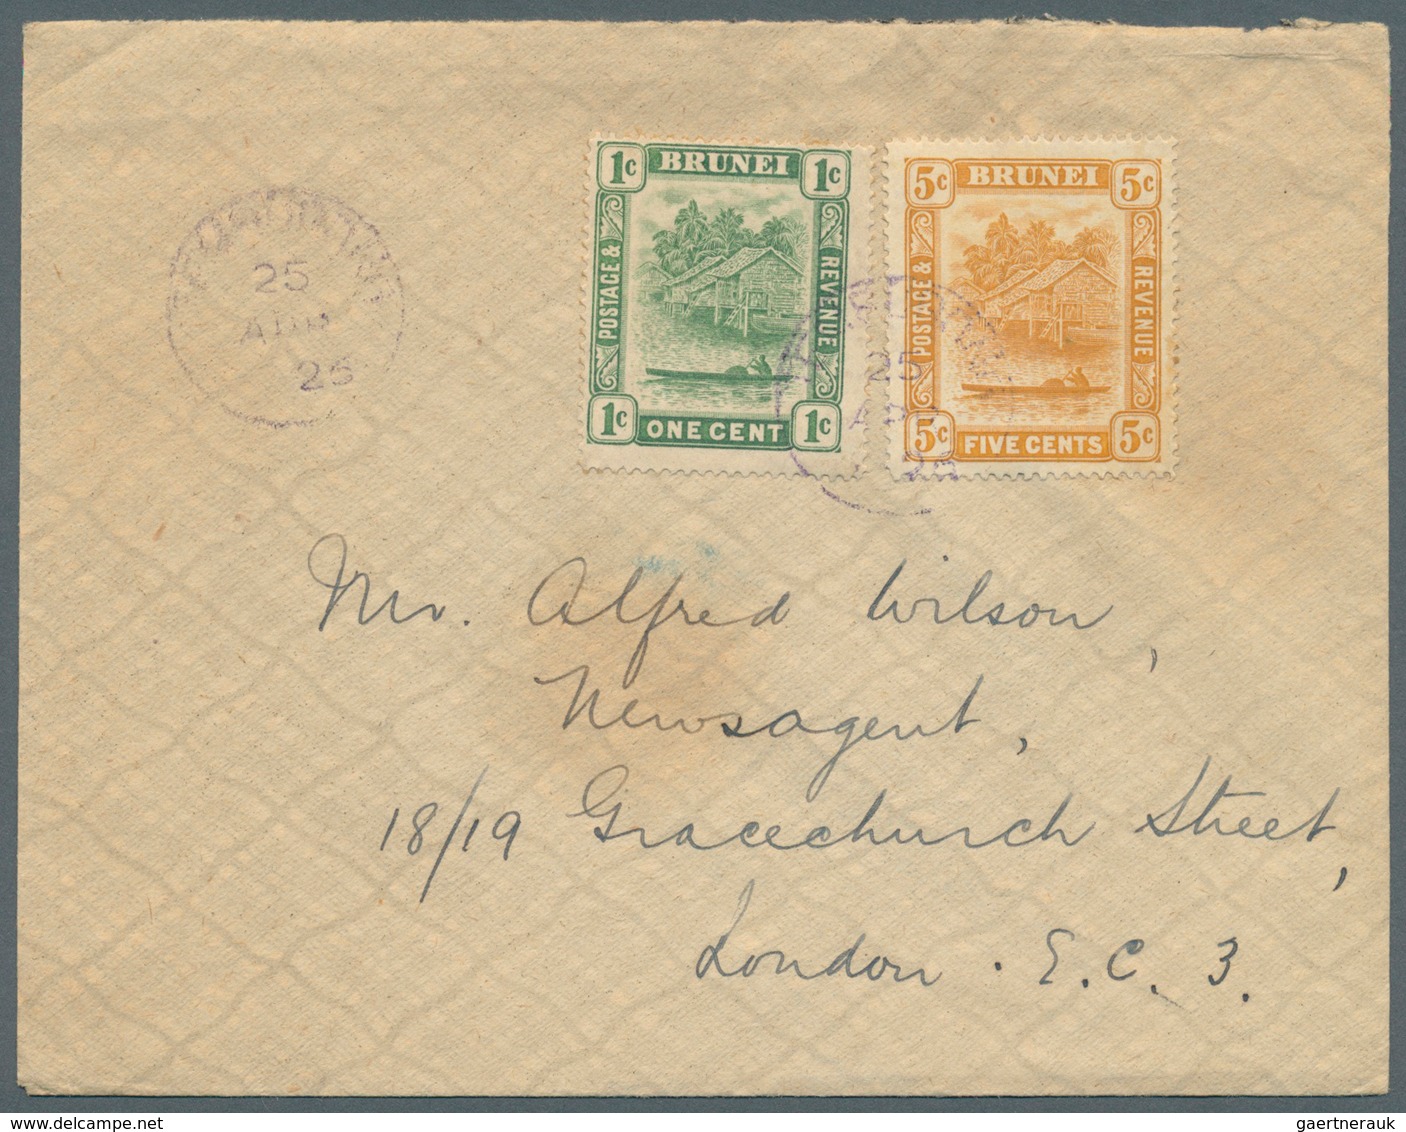 05118 Brunei - Stempel: TEMBURONG (type D3): 1926 (26.4.), Cover From Temburong To London At Correct 6c Im - Brunei (1984-...)